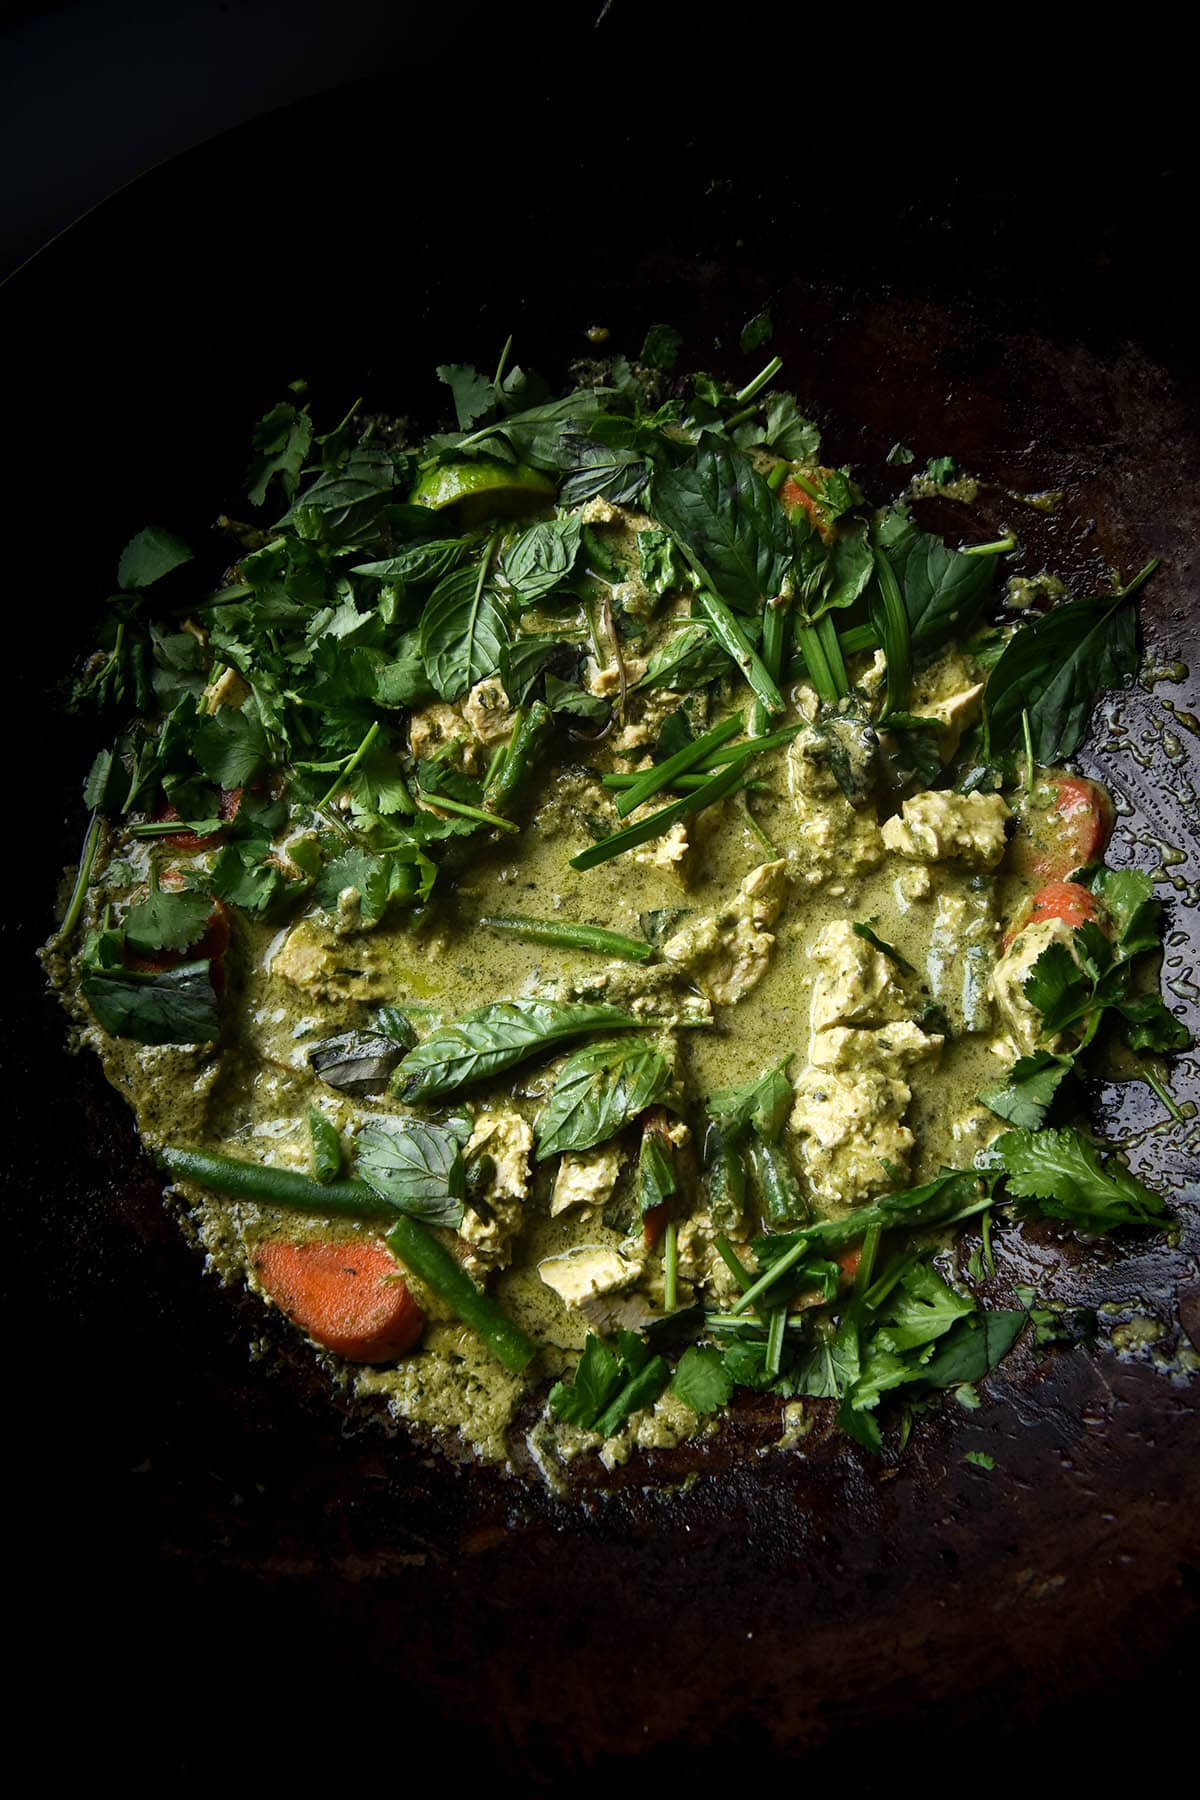 A close up aerial photo of FODMAP friendly vegan Thai curry in a wok. The curry is dotted with green beans, carrot slices and chunks of tofu, and casually adorned with lots of fresh herbs